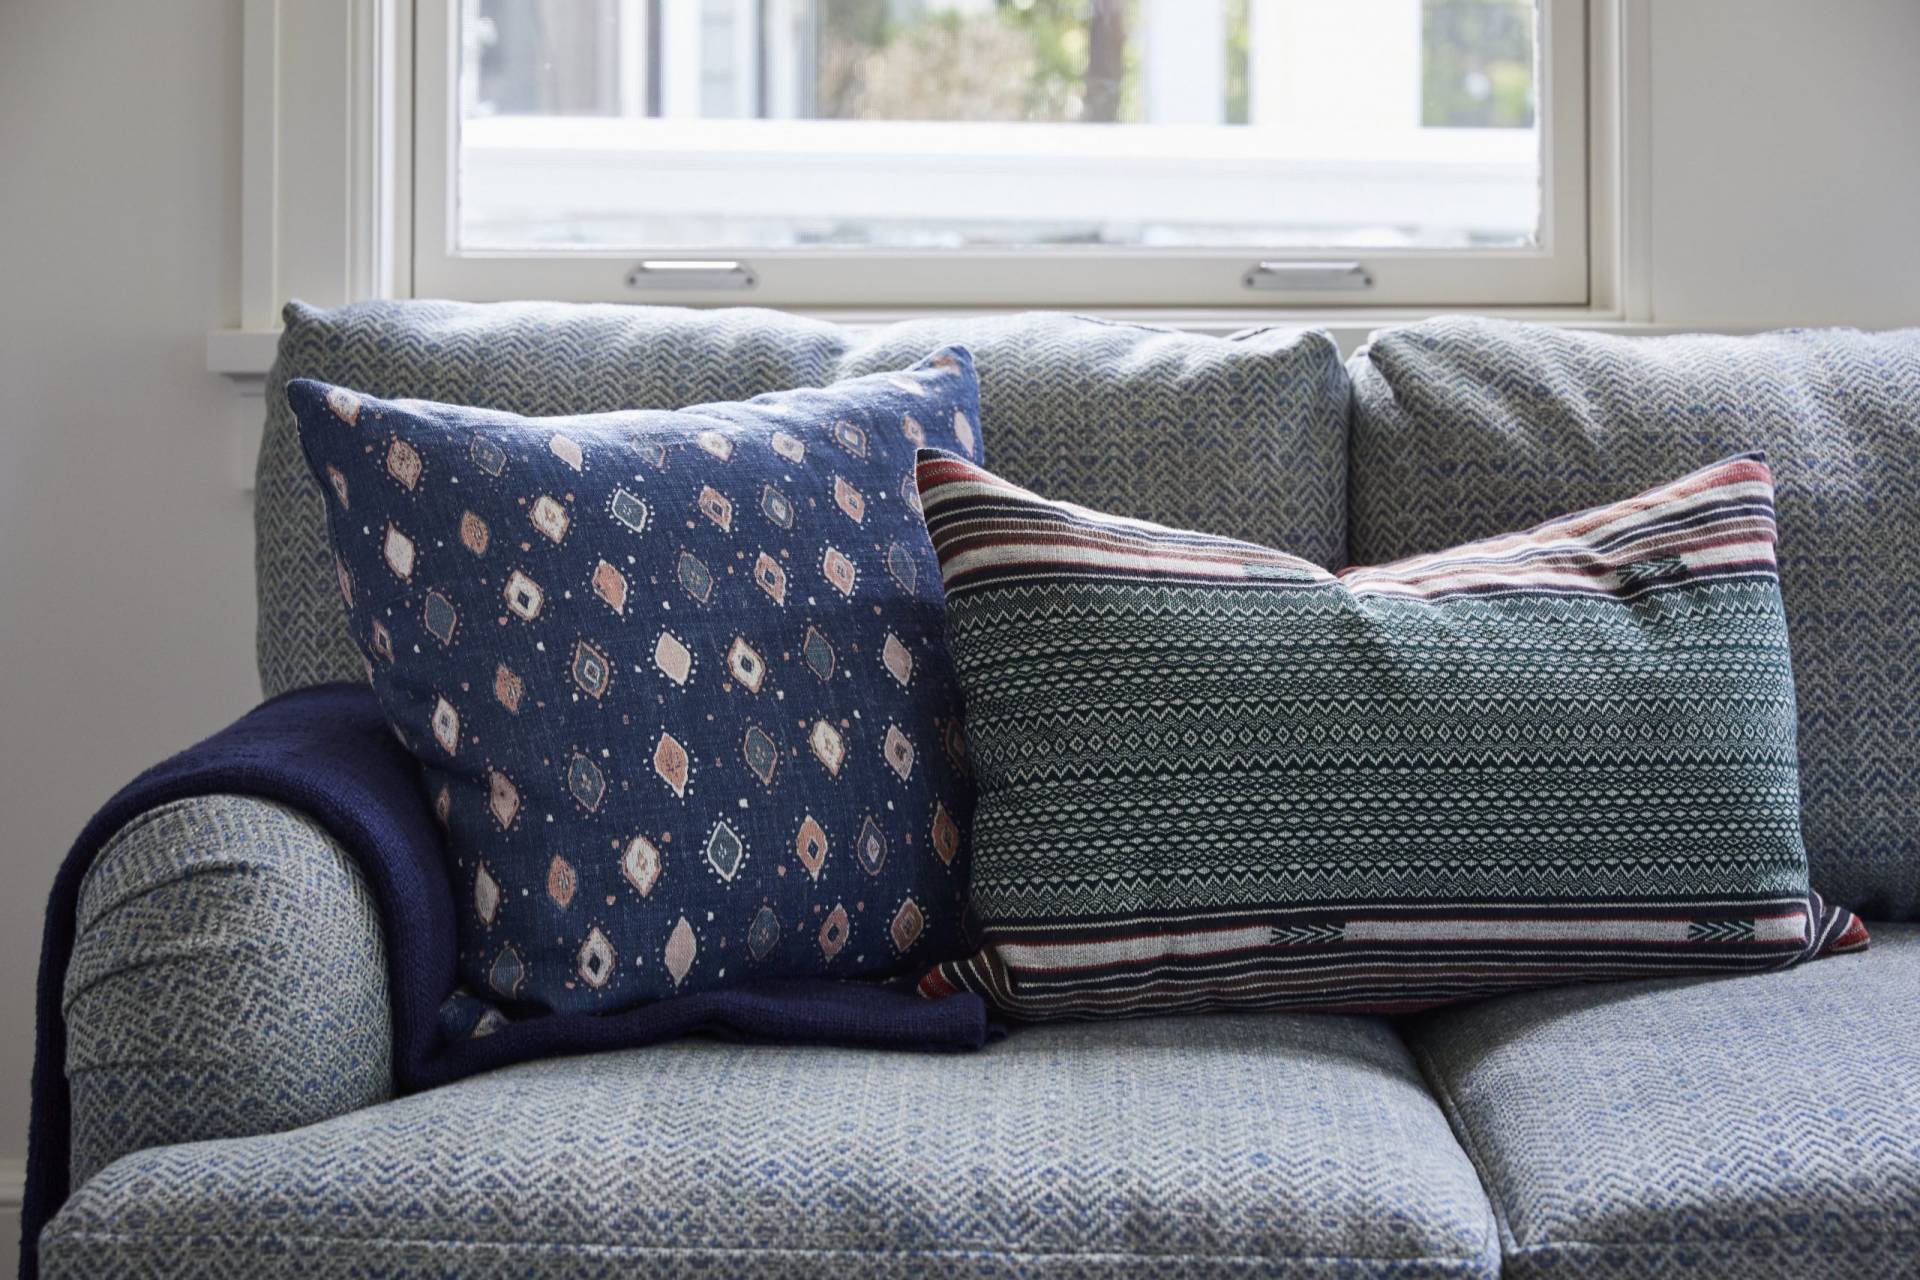 Blue herringbone sofa with patterned throw pillows